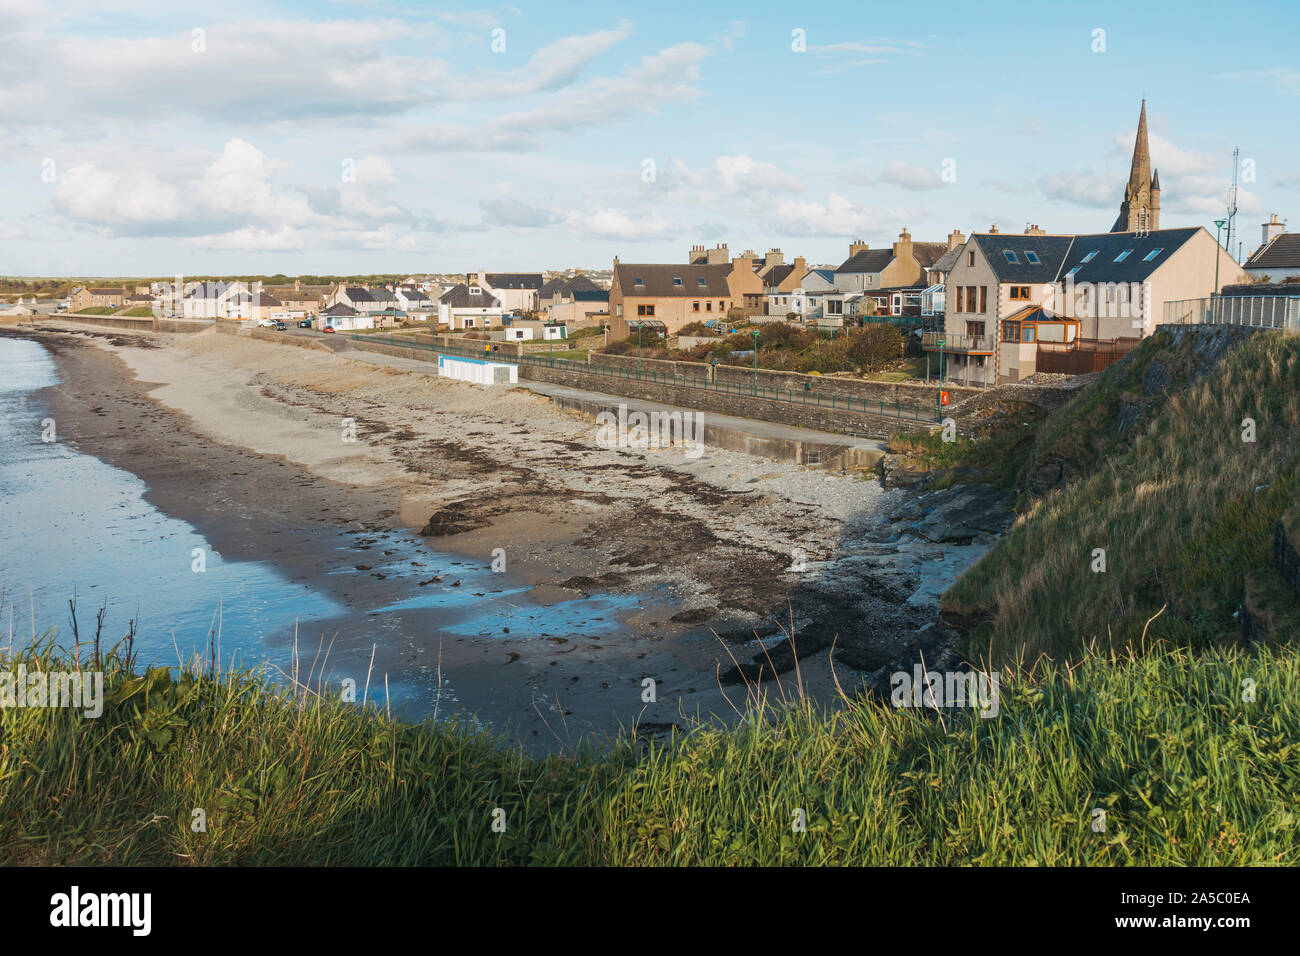 A lovely view over the peaceful Thurso township, seen from its coastline. Thurso is the most northerly UK mainland town. Stock Photo